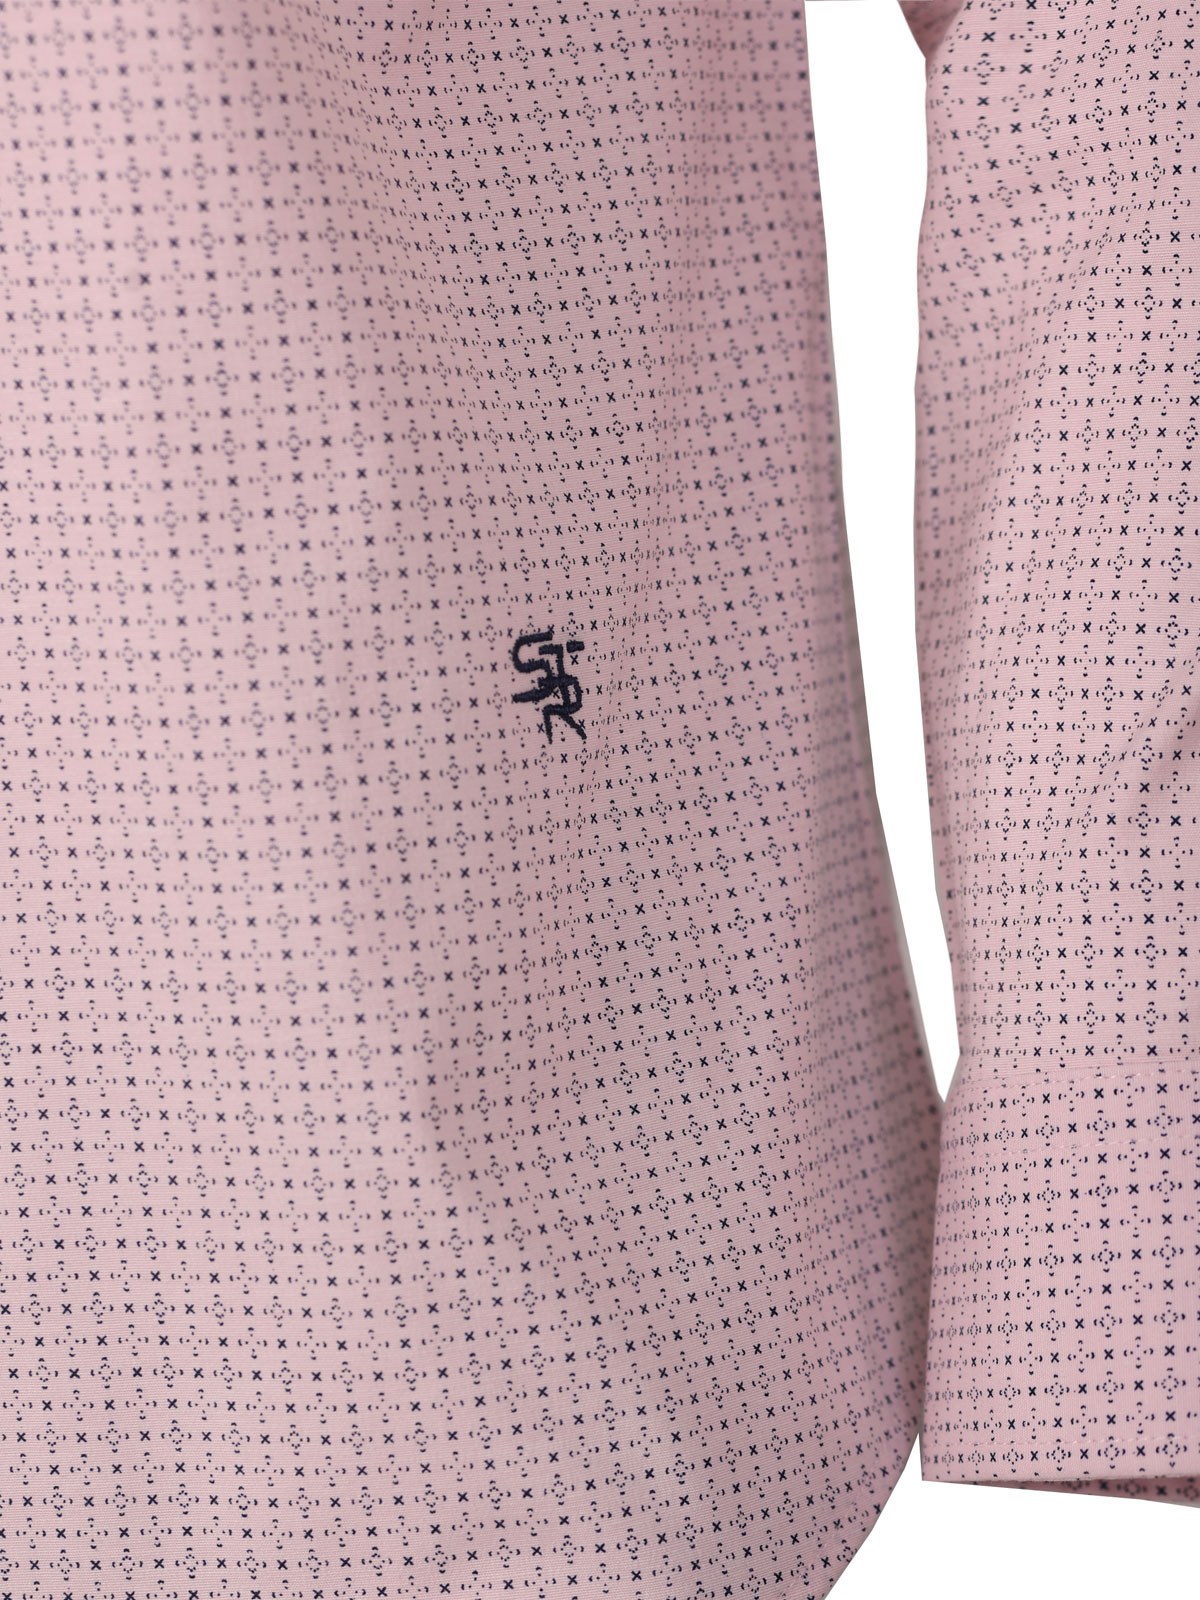 Shirt in pink with blue figures - 21605 € 44.43 img2